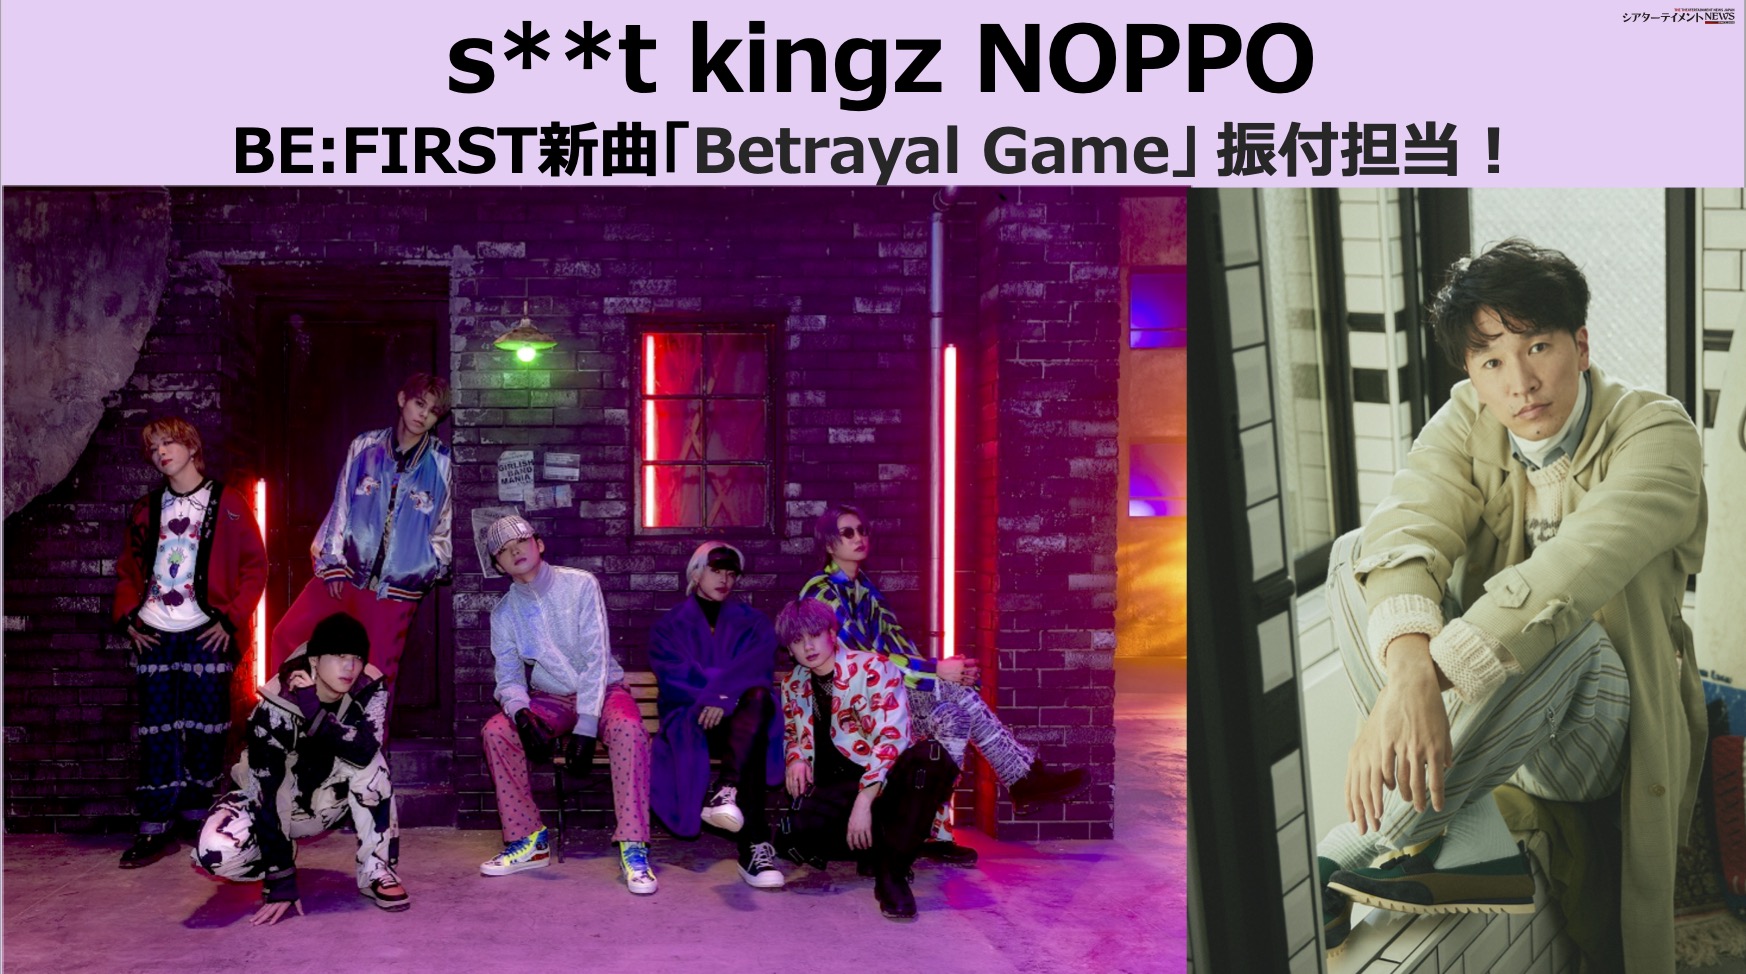 s**t kingz NOPPO BE:FIRST 新曲「Betrayal Game」 の振付を 